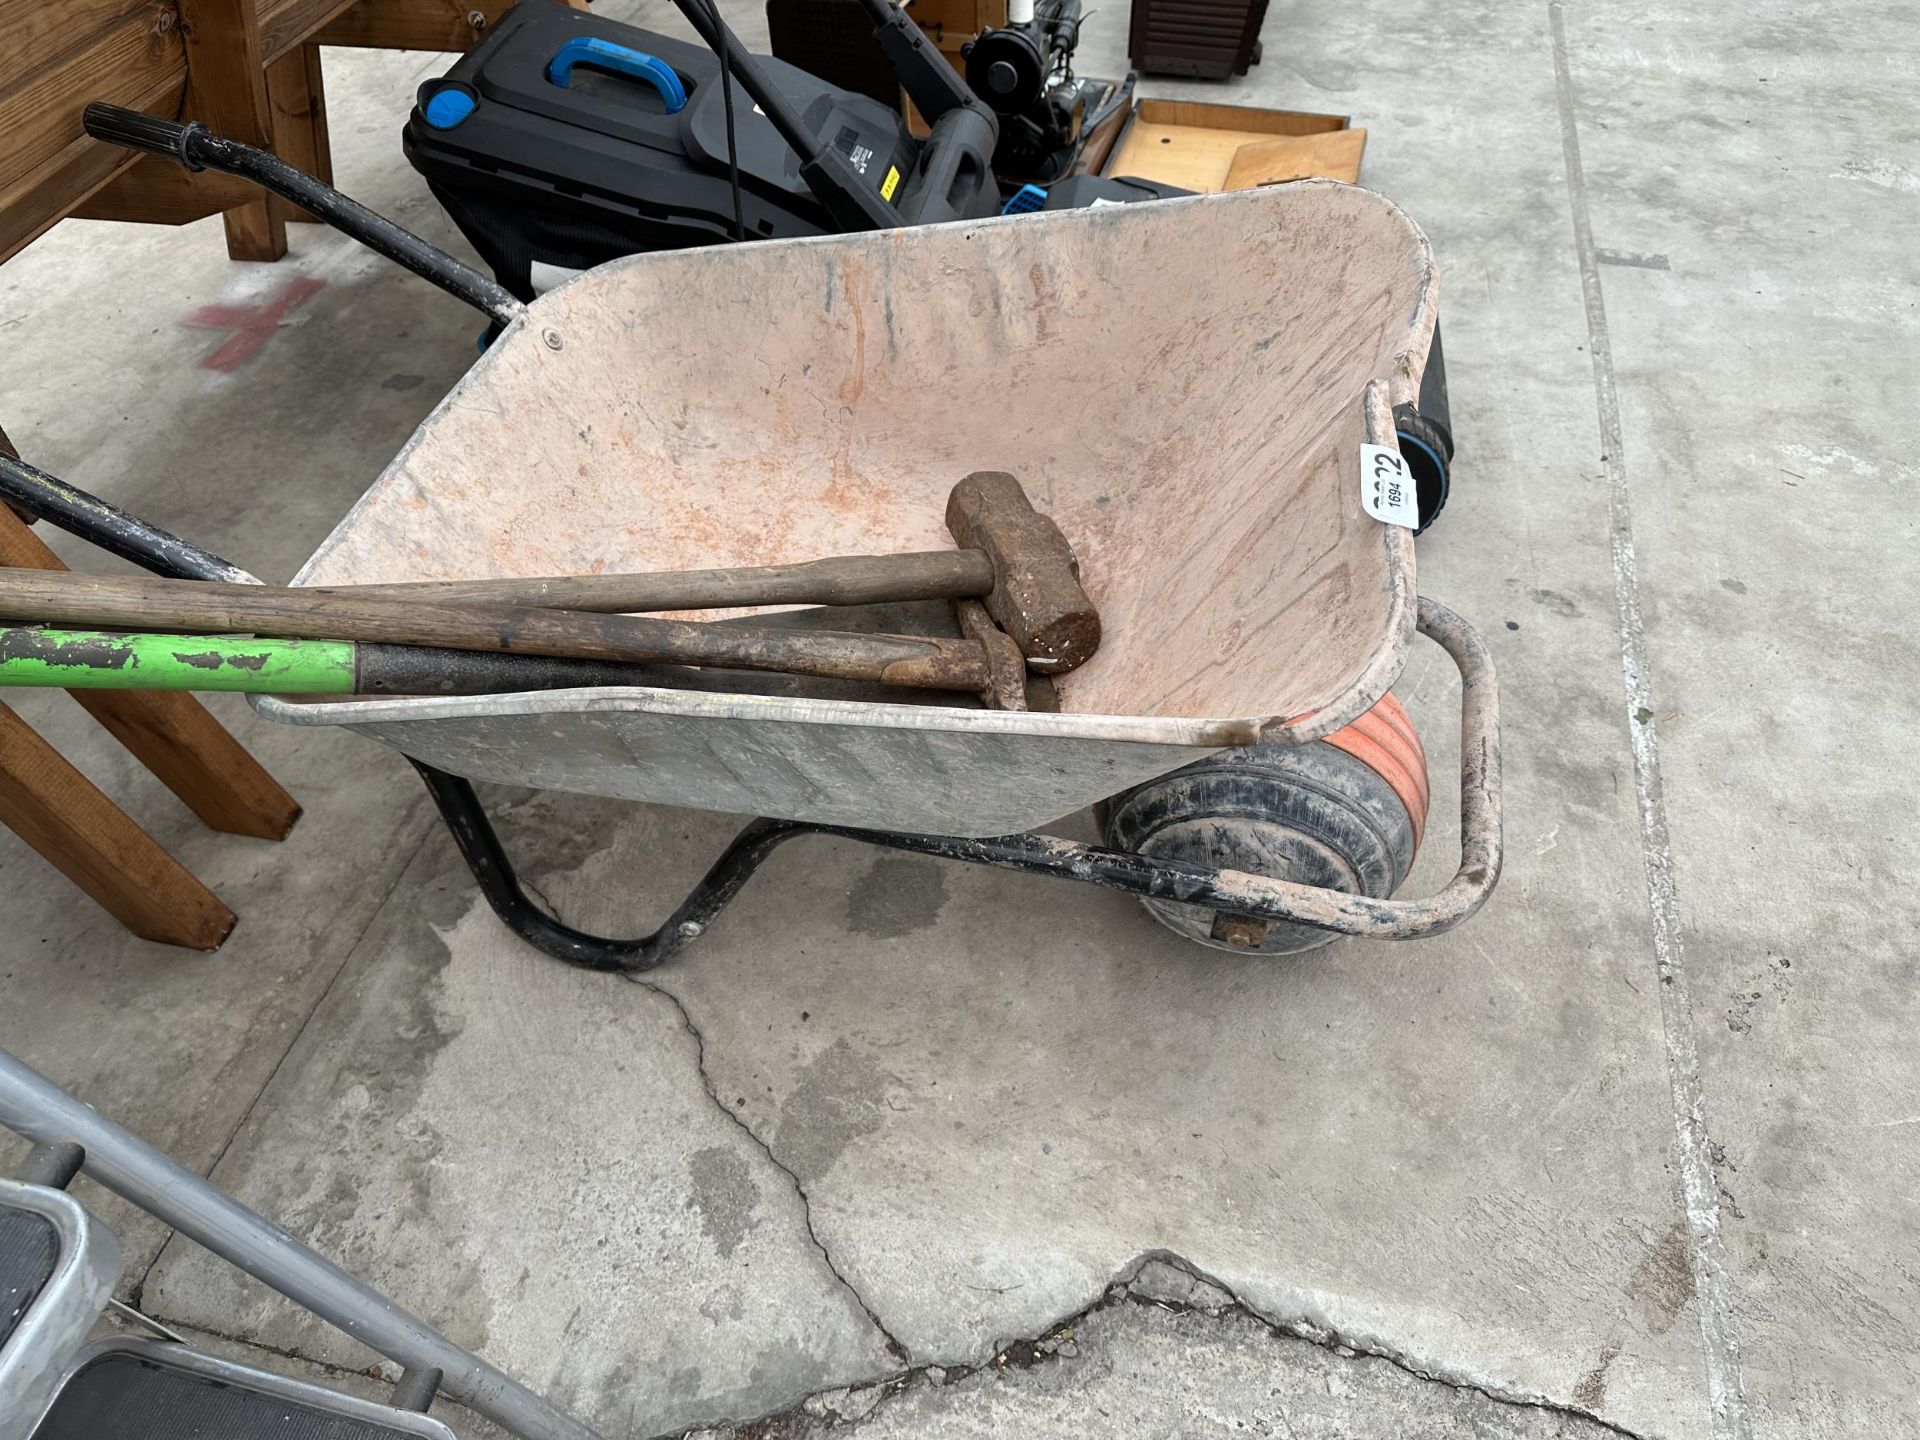 A METAL WHEEL BARROW AND TOOLS TO INCLUDE A SLEDGE HAMMER AND A PICK AXE ETC - Image 2 of 2